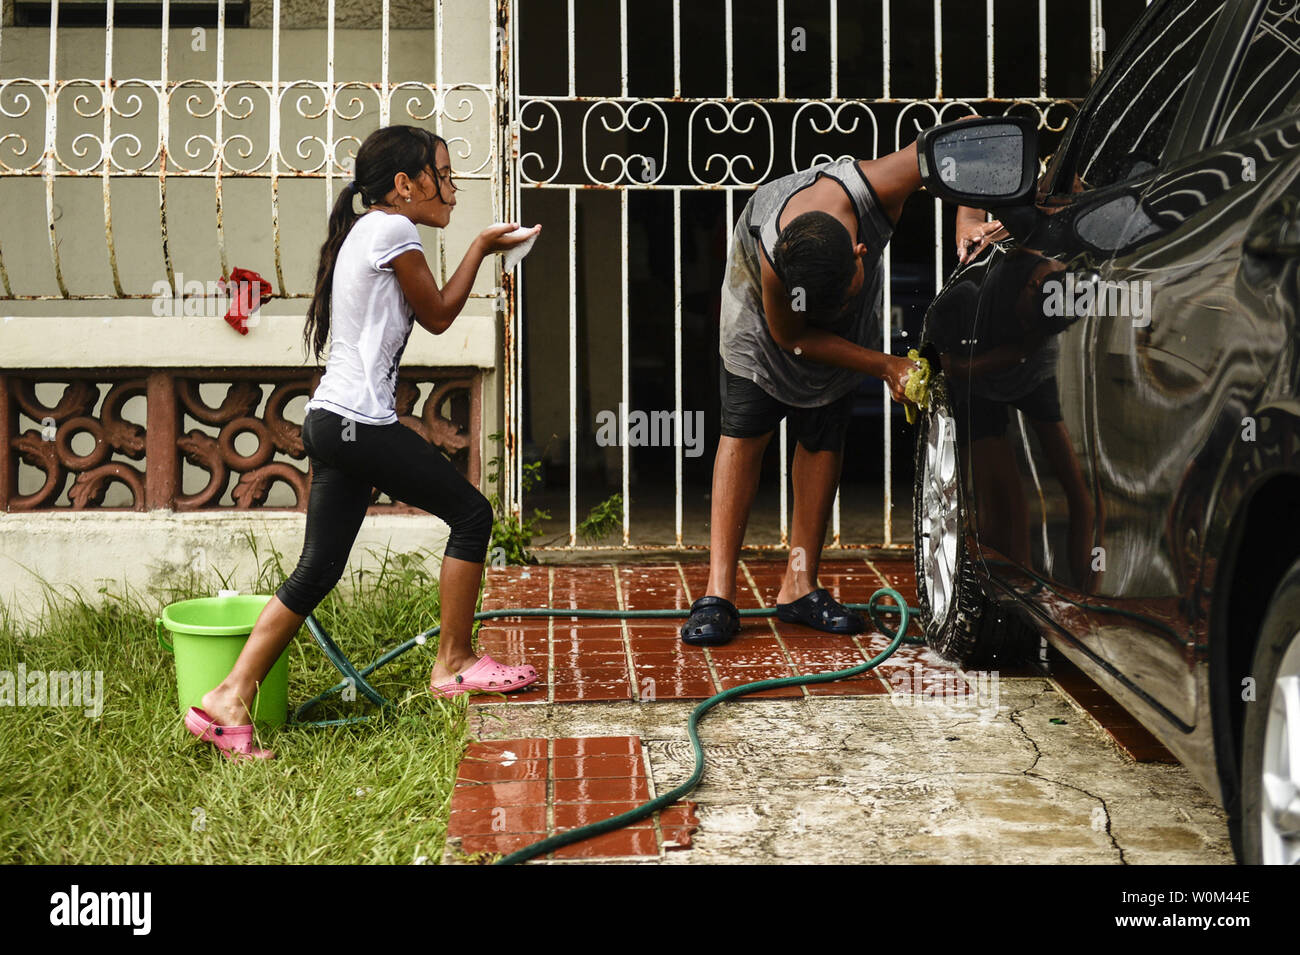 Fabiola Vazquez Barriel, 10, helps her brother, Junian, 14, wash their father's car in San Juan, Puerto Rico, on October 3, 2017. The people of Puerto Rico are resilient, evidenced by the stories of neighbor helping neighbor, and communities helping communities after Hurricane Maria devastated the island. Photo by Master Sgt. Joshua DeMotts/U.S. Air Force/UPI Stock Photo